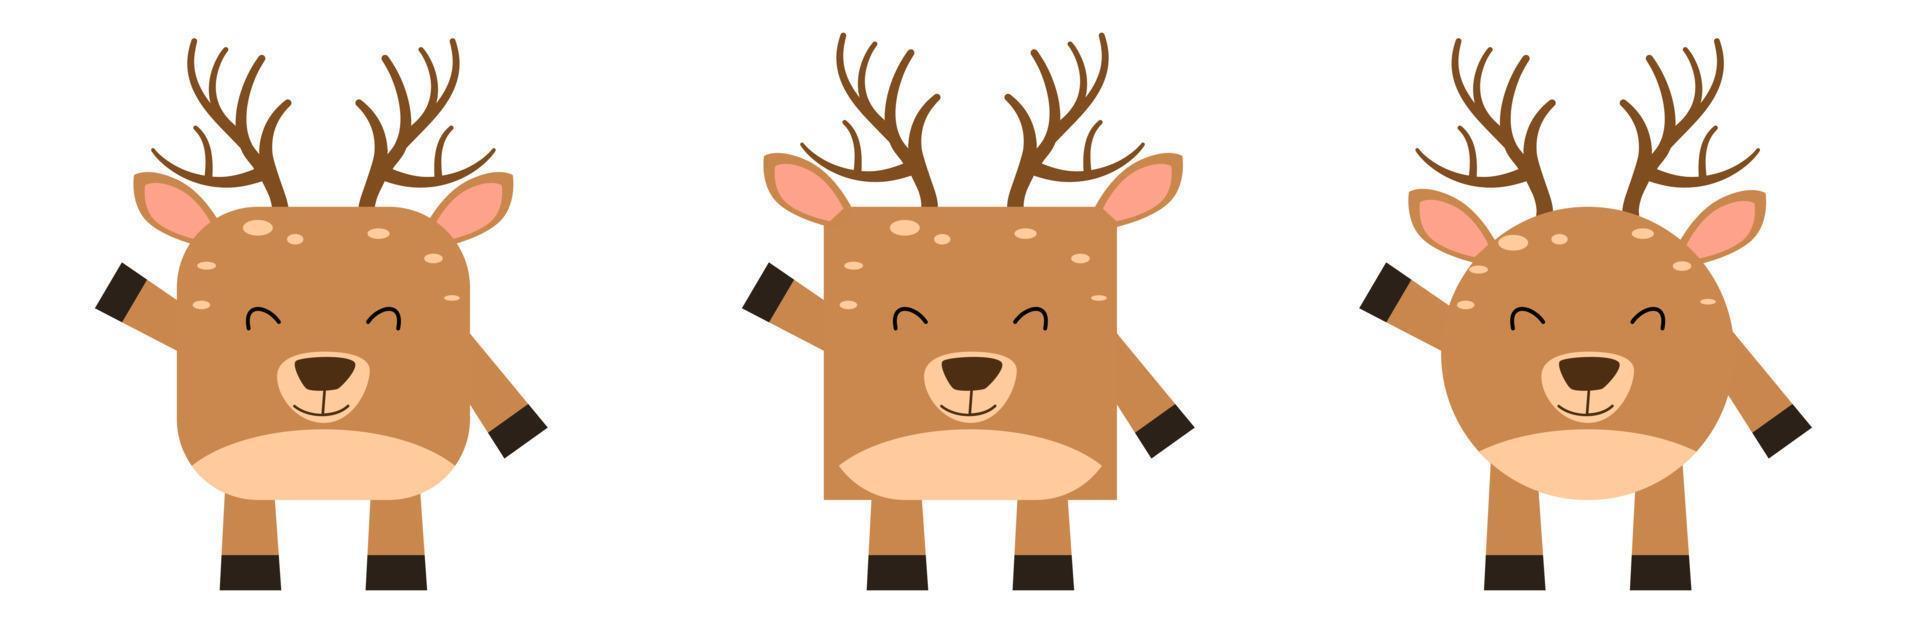 A set of animals of square and round shape. Vector illustration of a deer